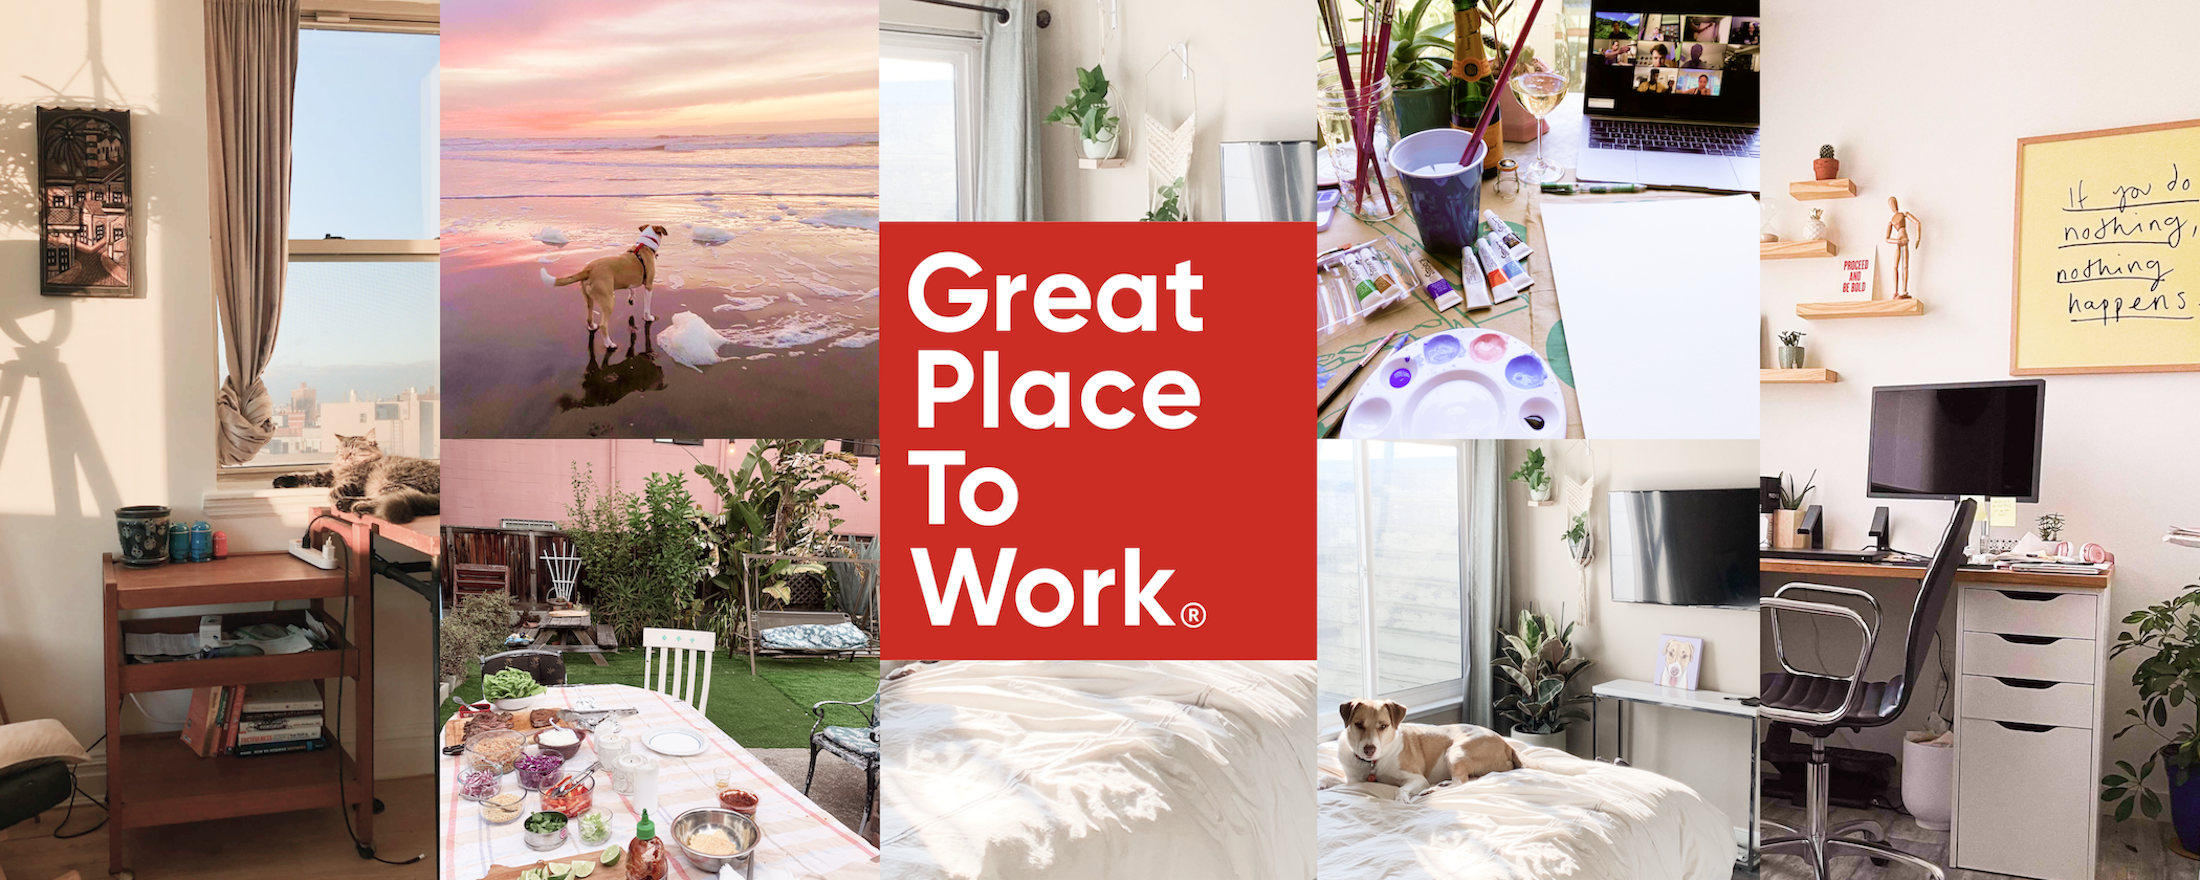 Gem is Named One of 2021’s Best Workplaces in the Bay Area by Great Place to Work and Fortune